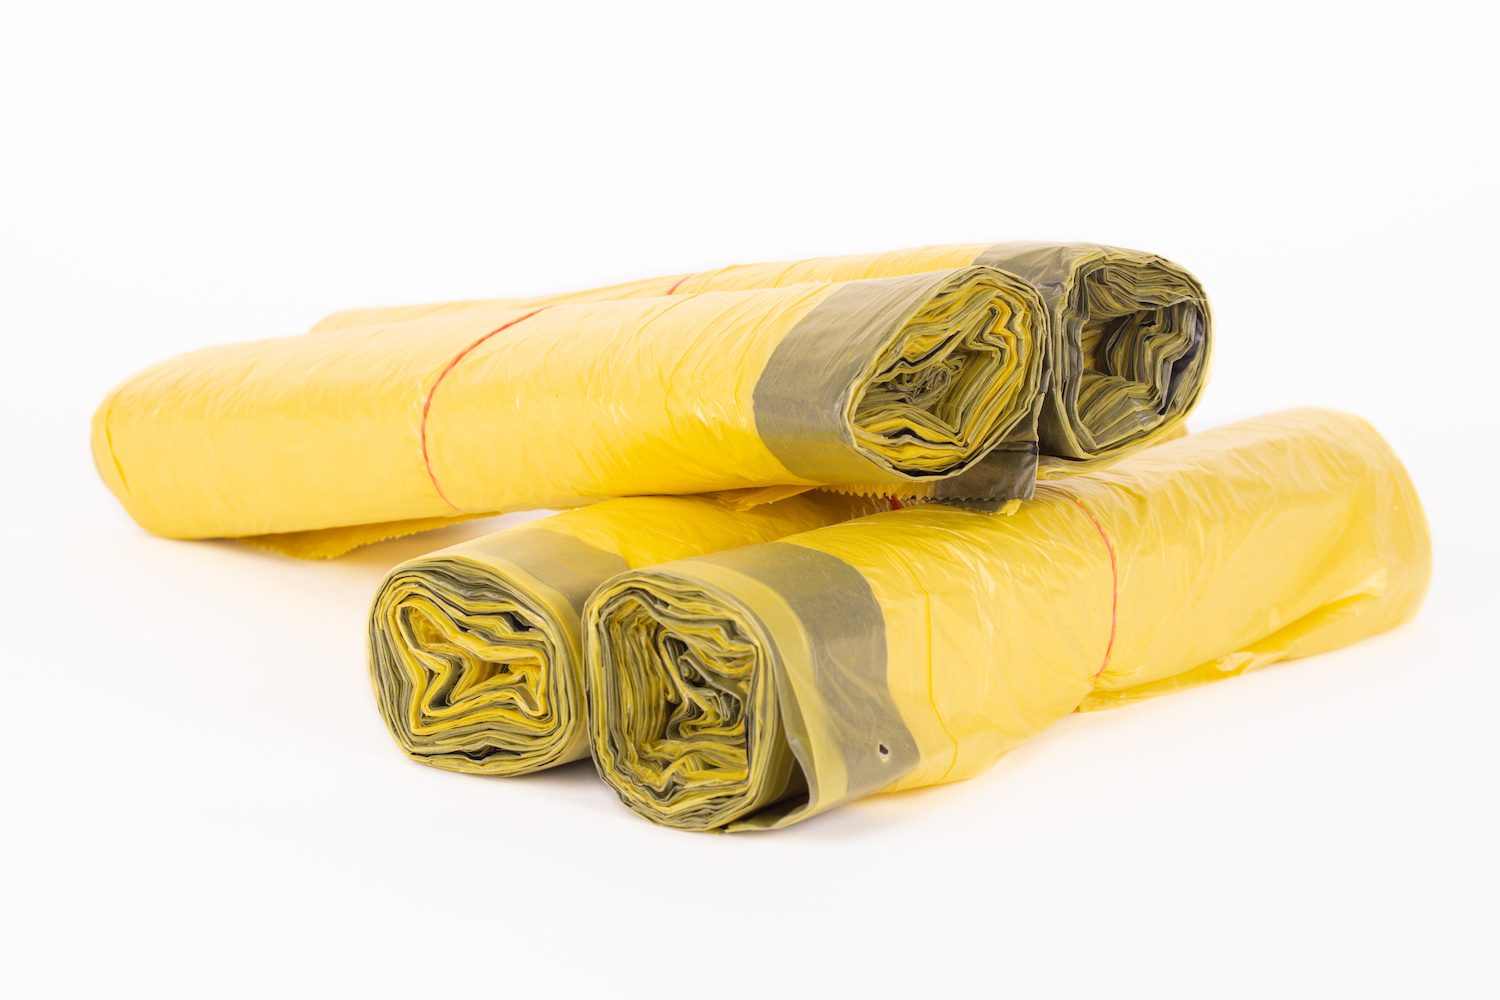 Top more than 74 yellow clinical waste bags super hot - esthdonghoadian